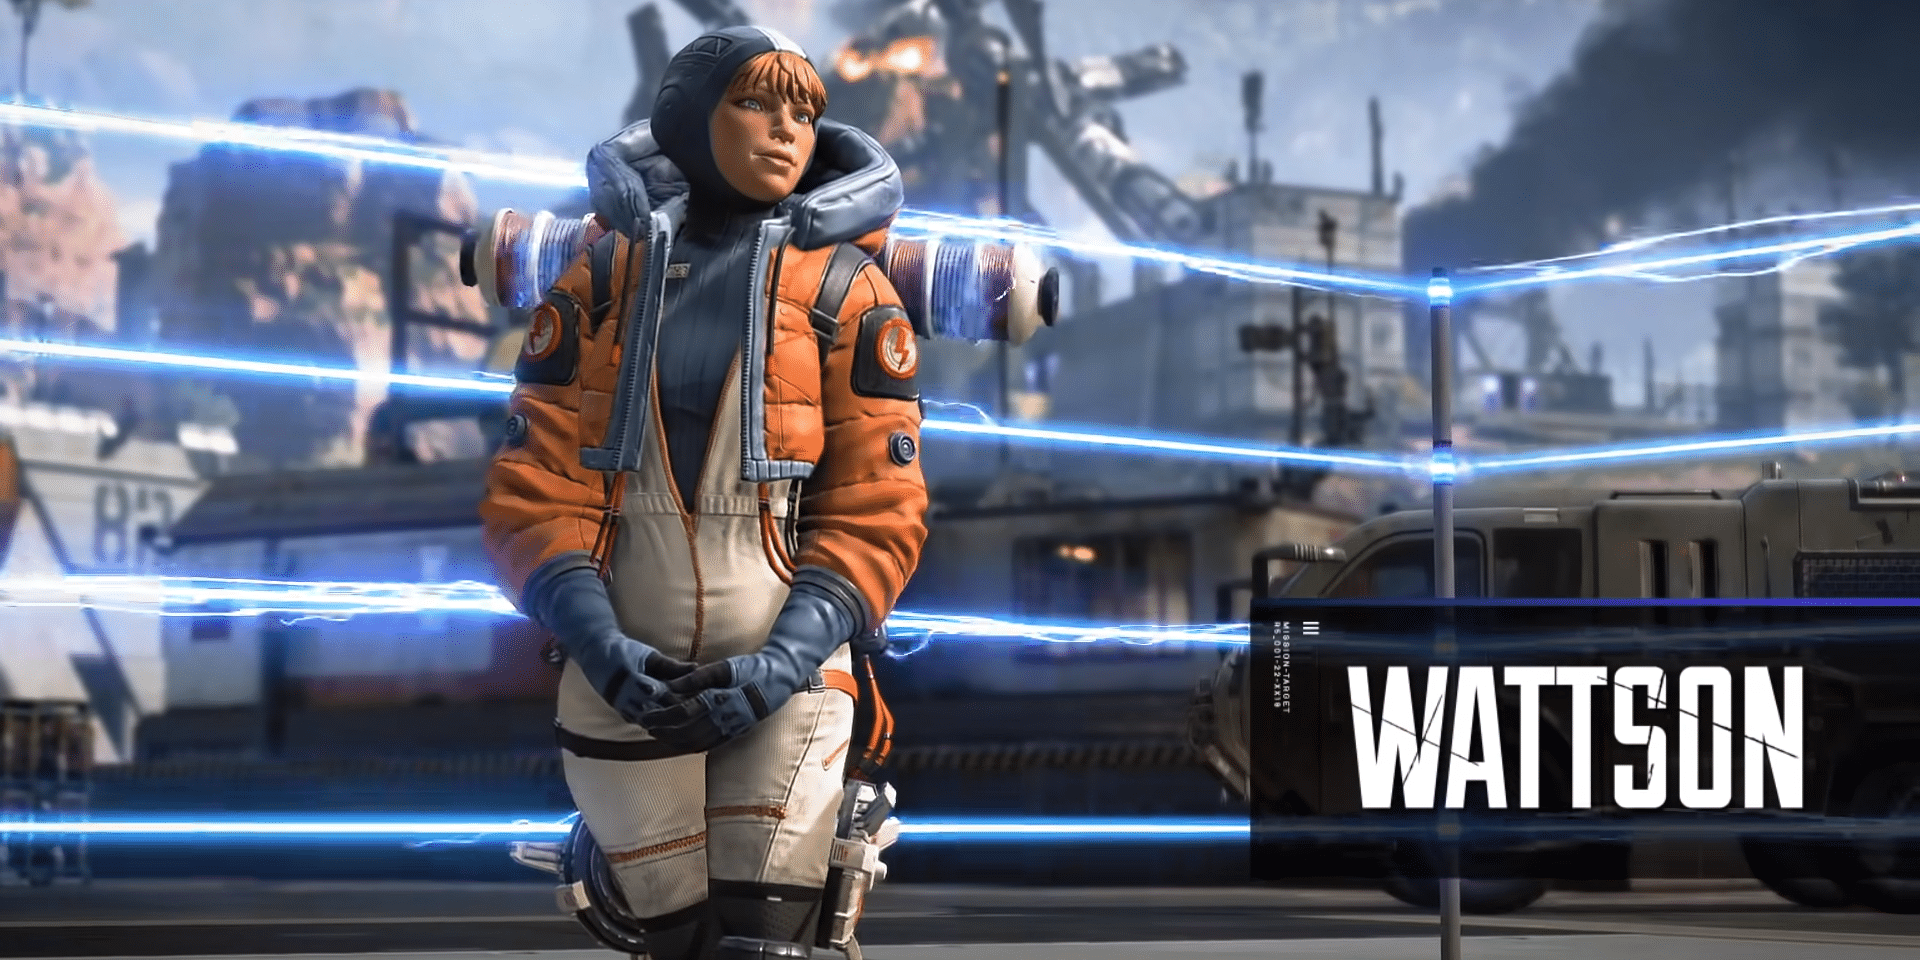 Apex Legends Mobile Wattson Guide - Tips and tricks, abilities